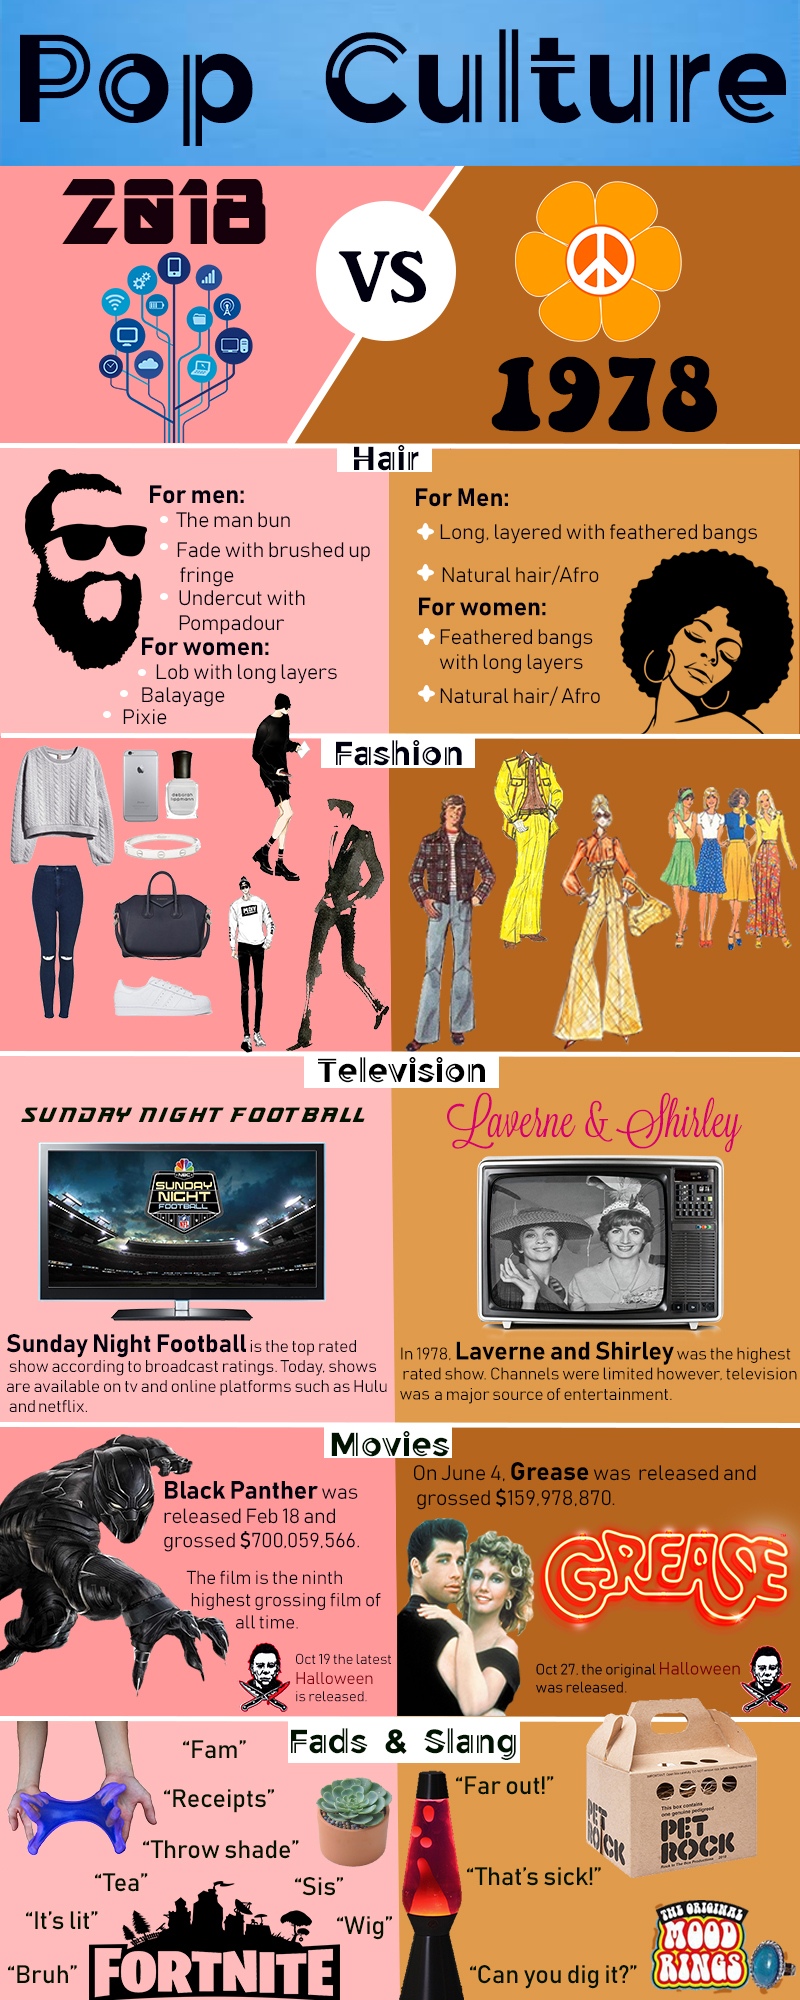 INFOGRAPHIC From feathered bangs to man buns, pop culture spans past